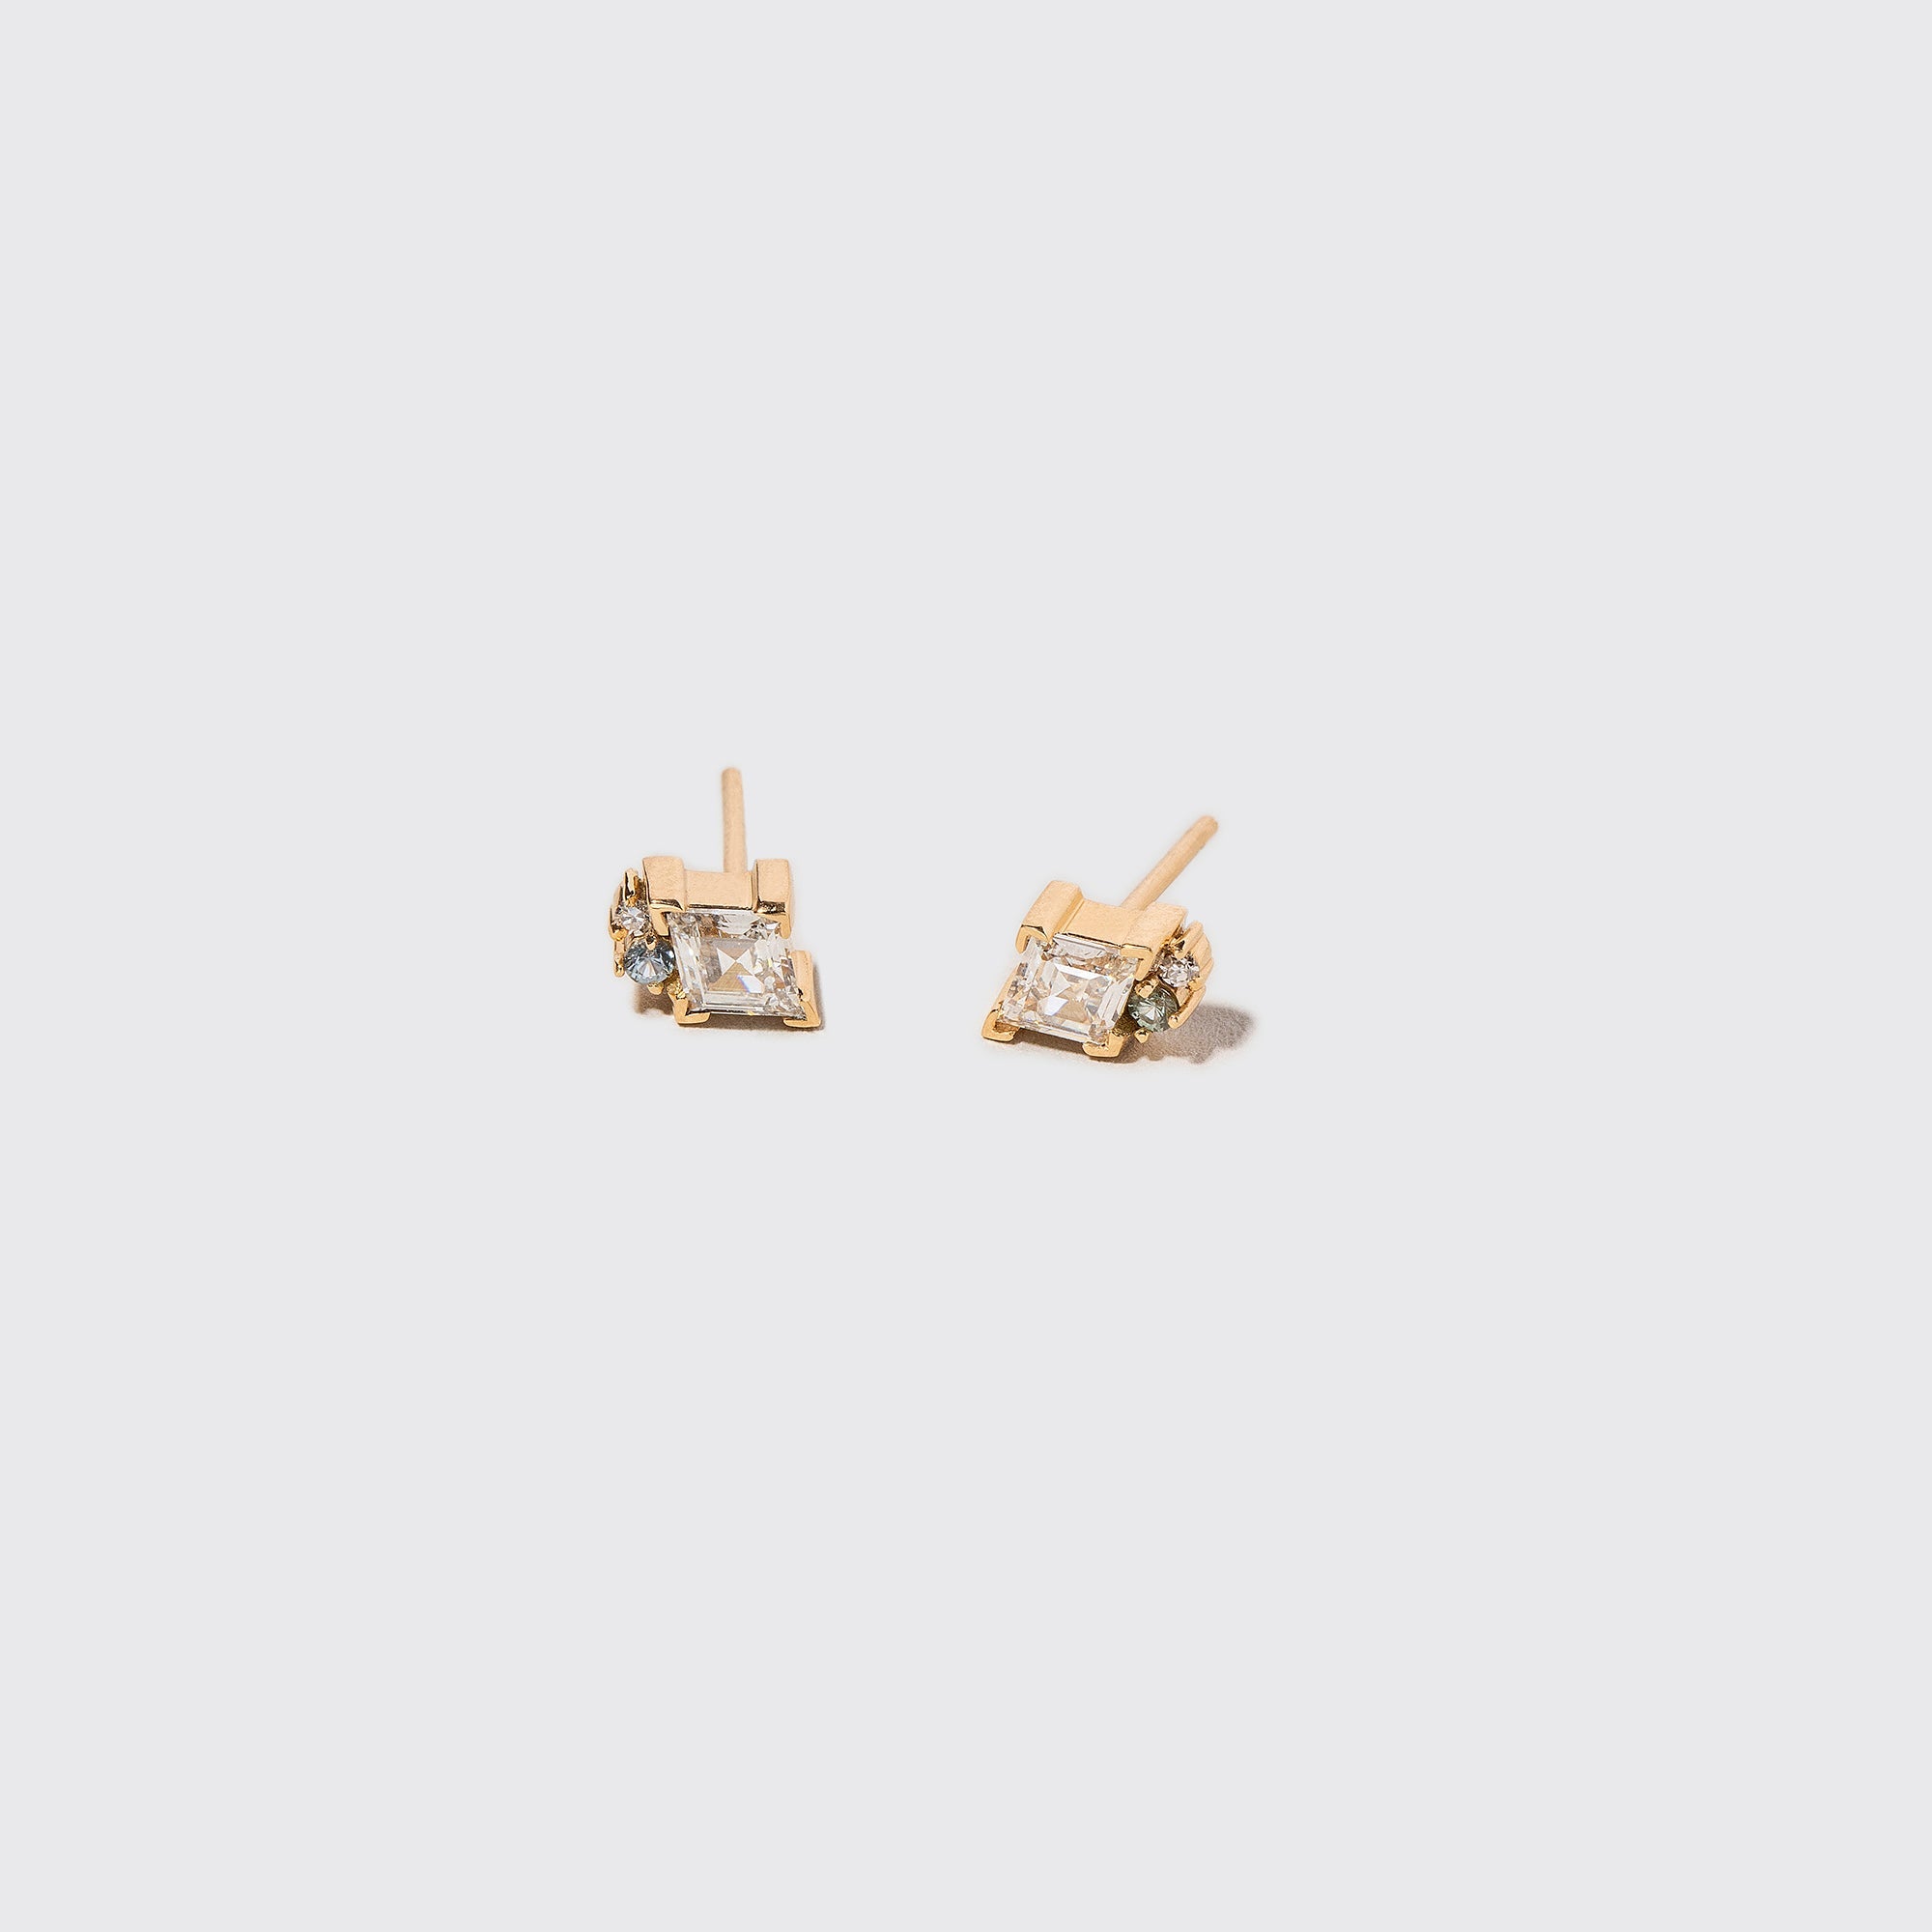 product_details:: Reciprocating Earrings on light color background.